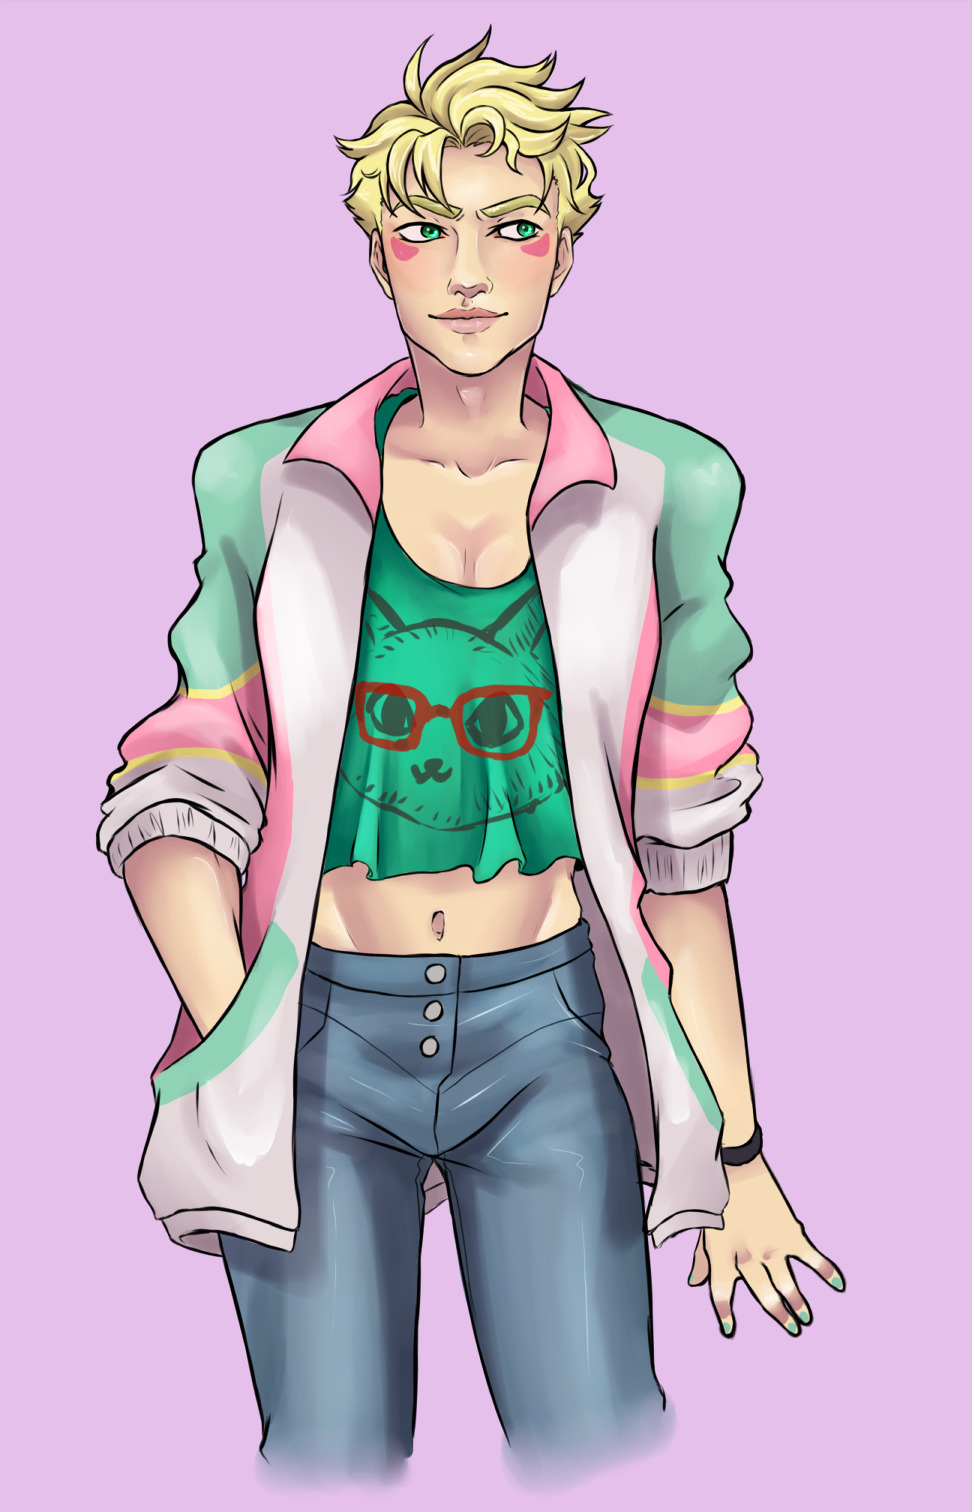 pompadorkery:  Had to draw Caesar in my OOTD. No apologies for looking like a rockin’